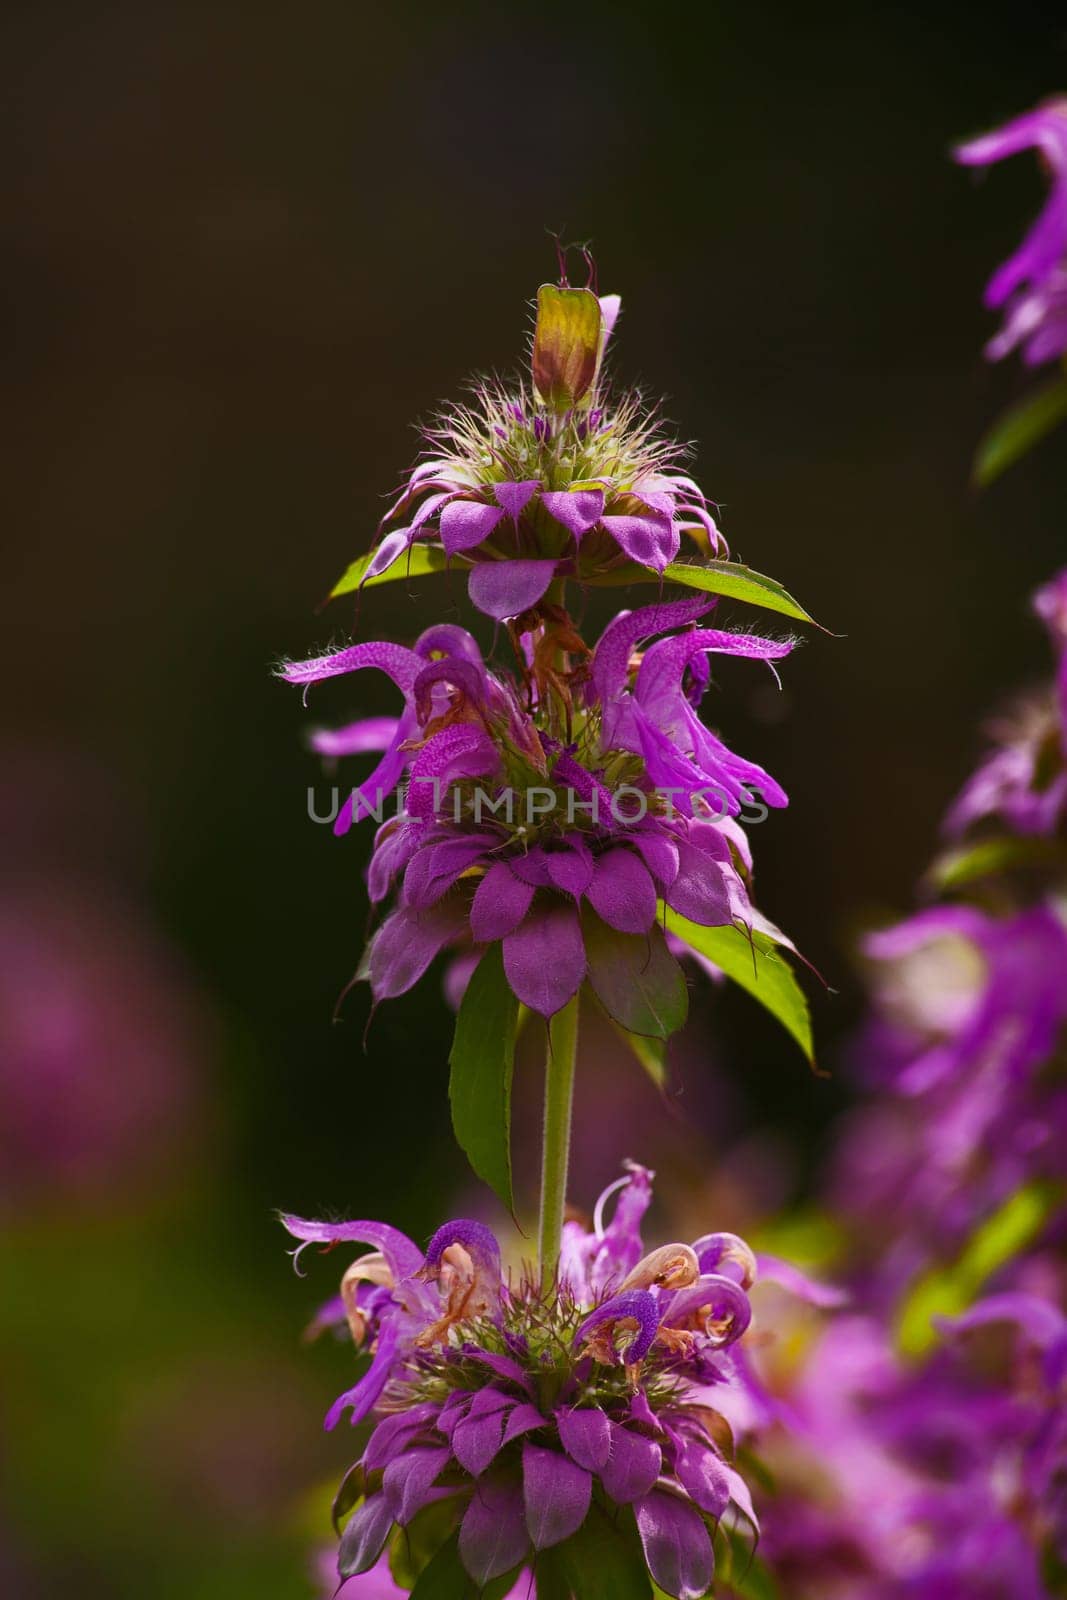 Lemon Beebalm (Monarda citriodora) is a perenial with lovely flowers but also culinary and medicinal uses.